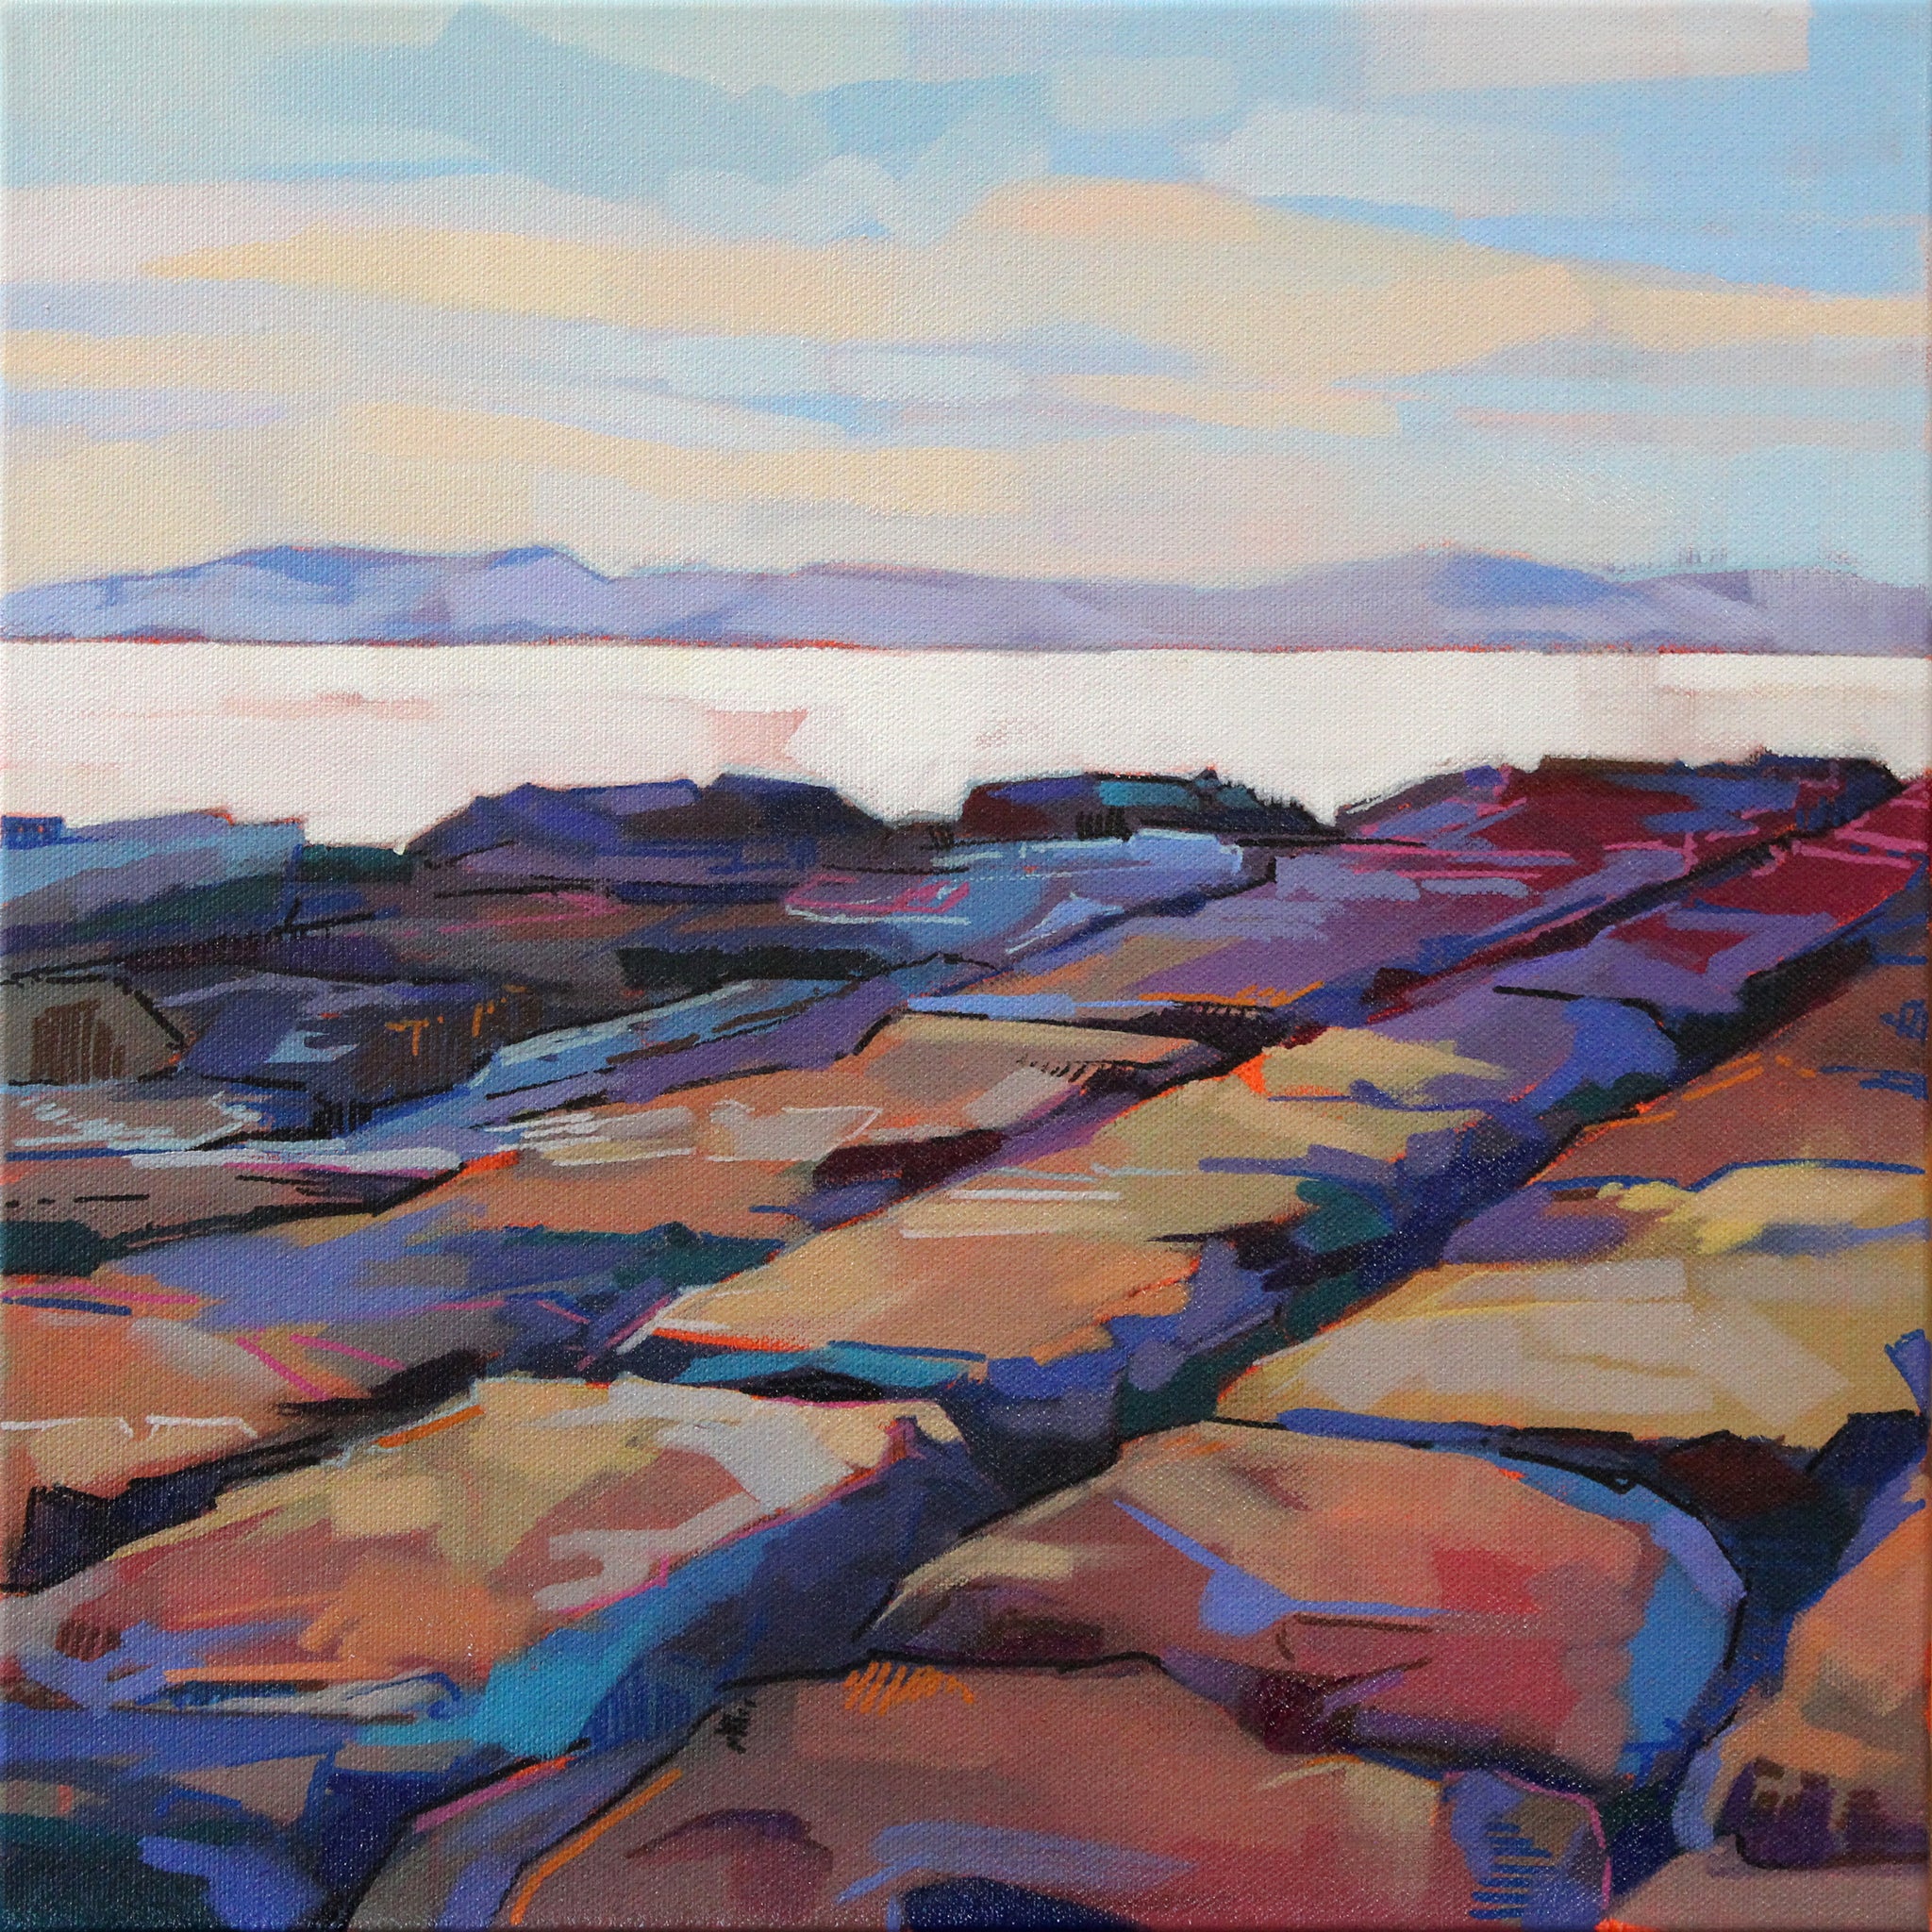 Rocks At Pampa IV - Contemporary art from Ireland. Paintings & prints by Irish seascape & landscape artist Kevin Lowery.